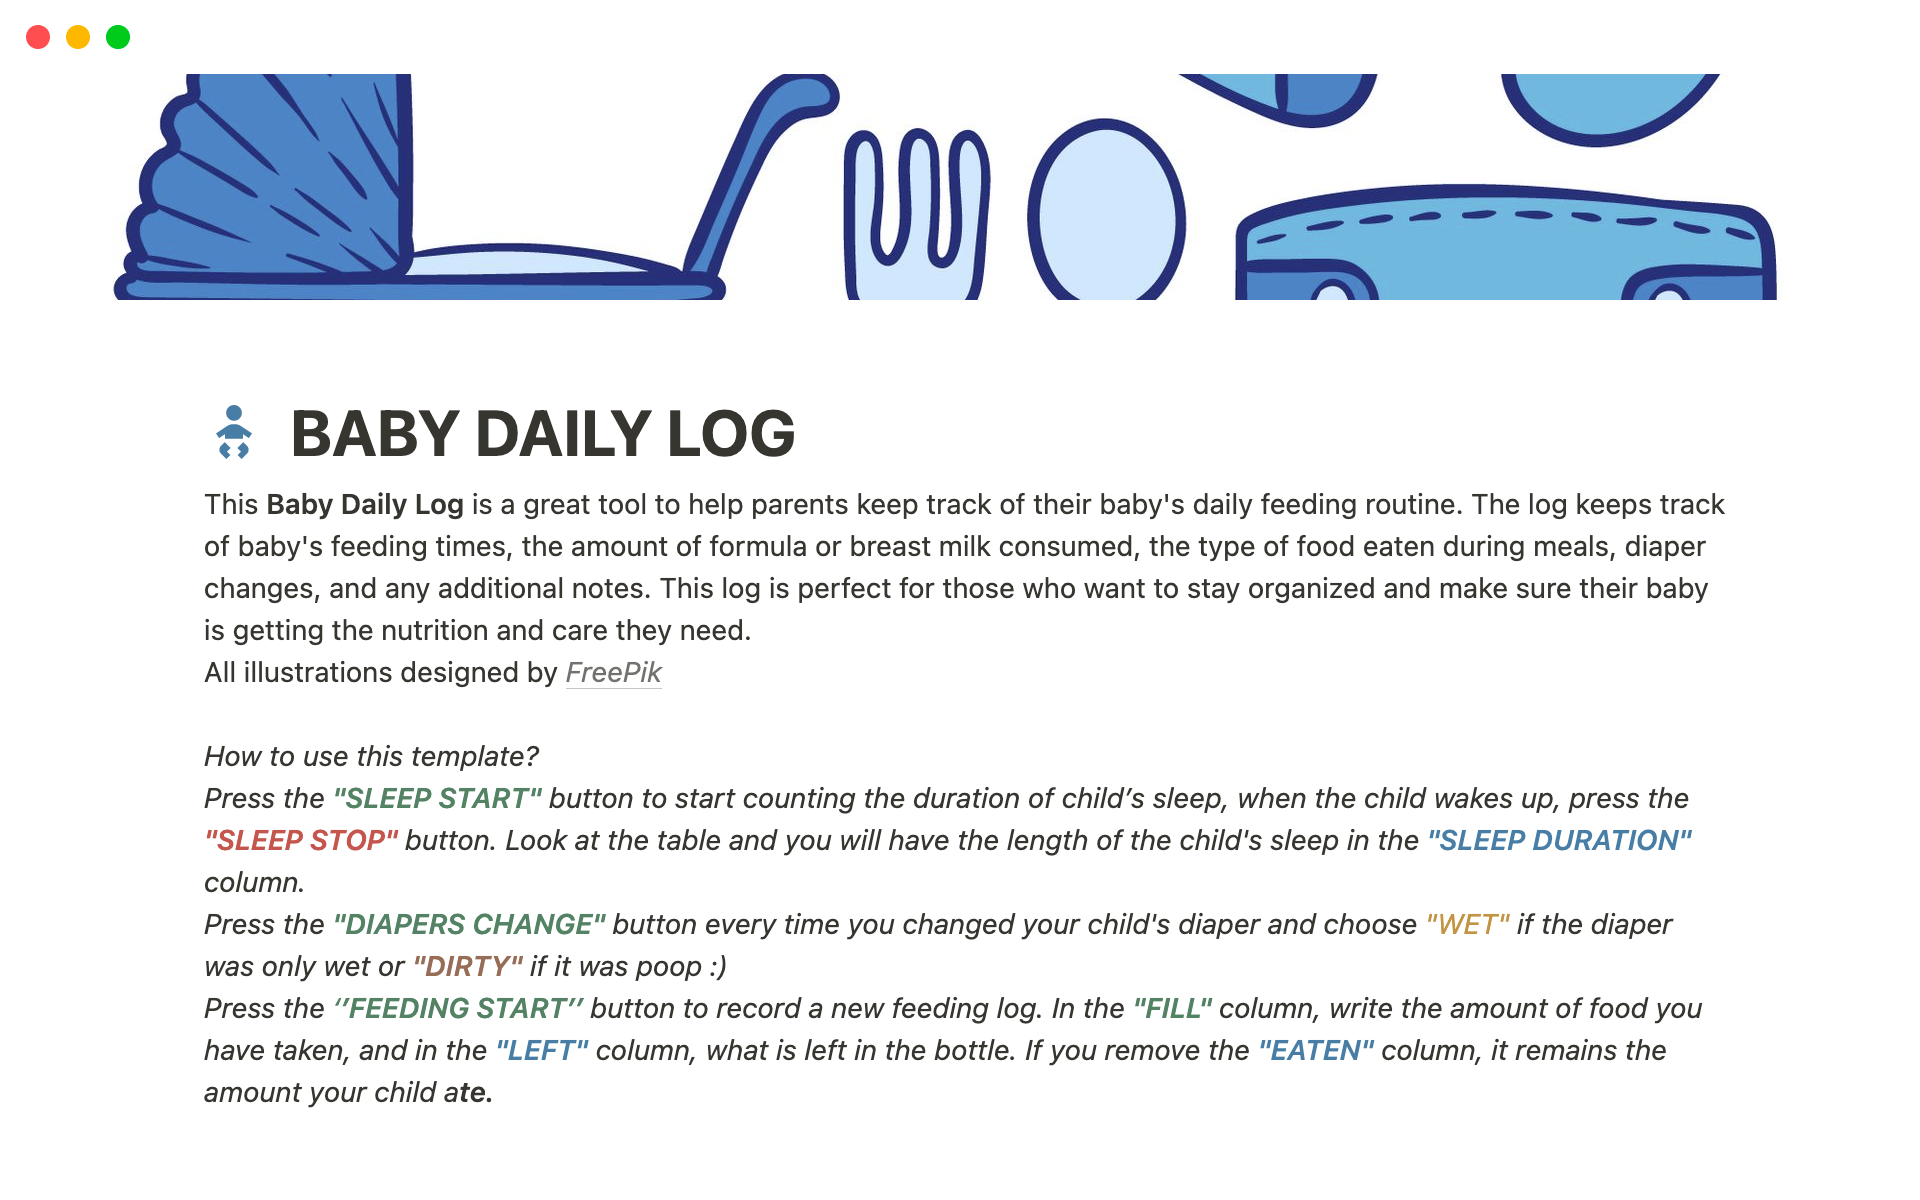 This Baby Daily Log is a great tool to help parents keep track of their baby's daily feeding routine.